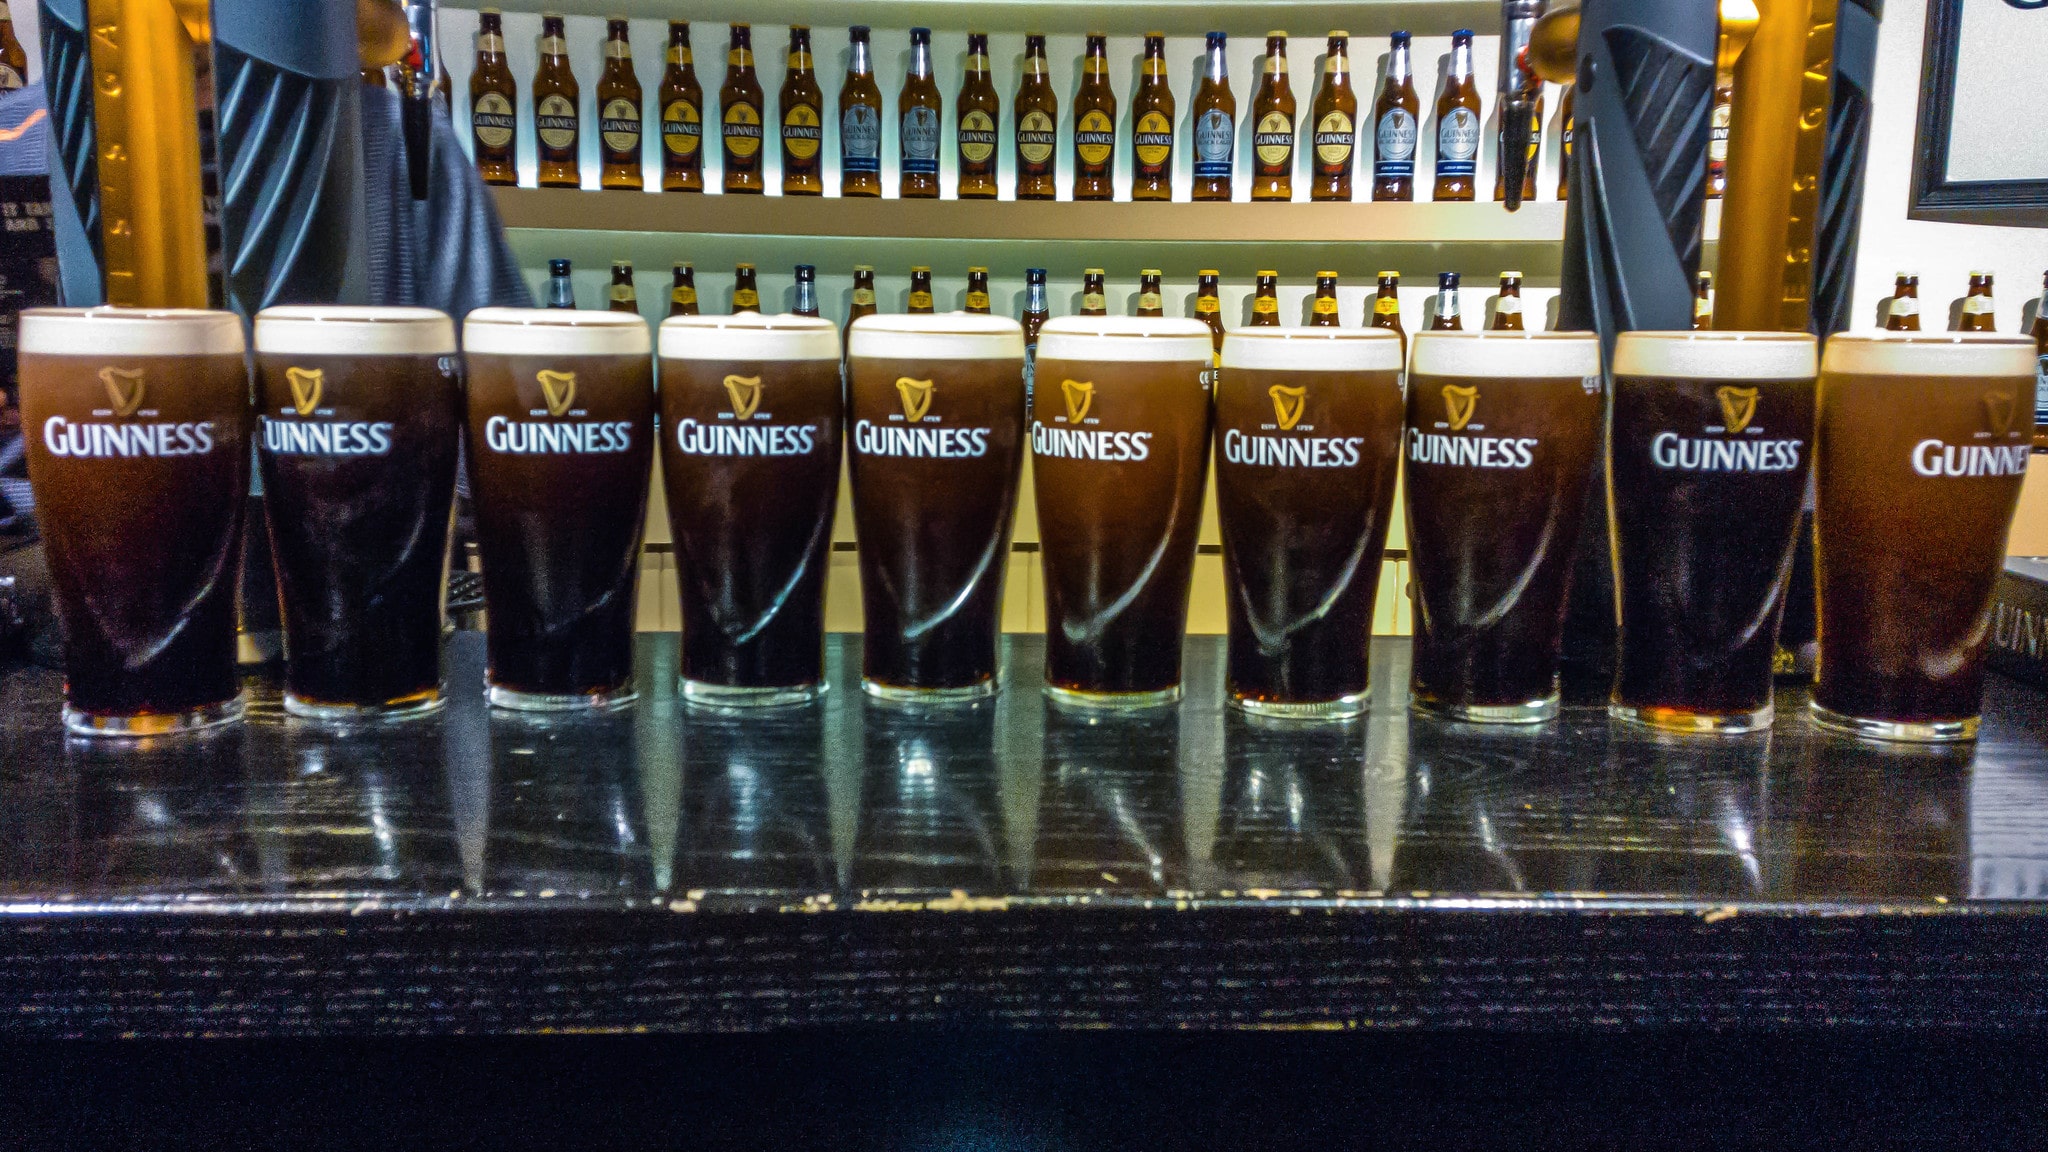 The Guinness Factory is a fun (and necessary) place to visit in Ireland